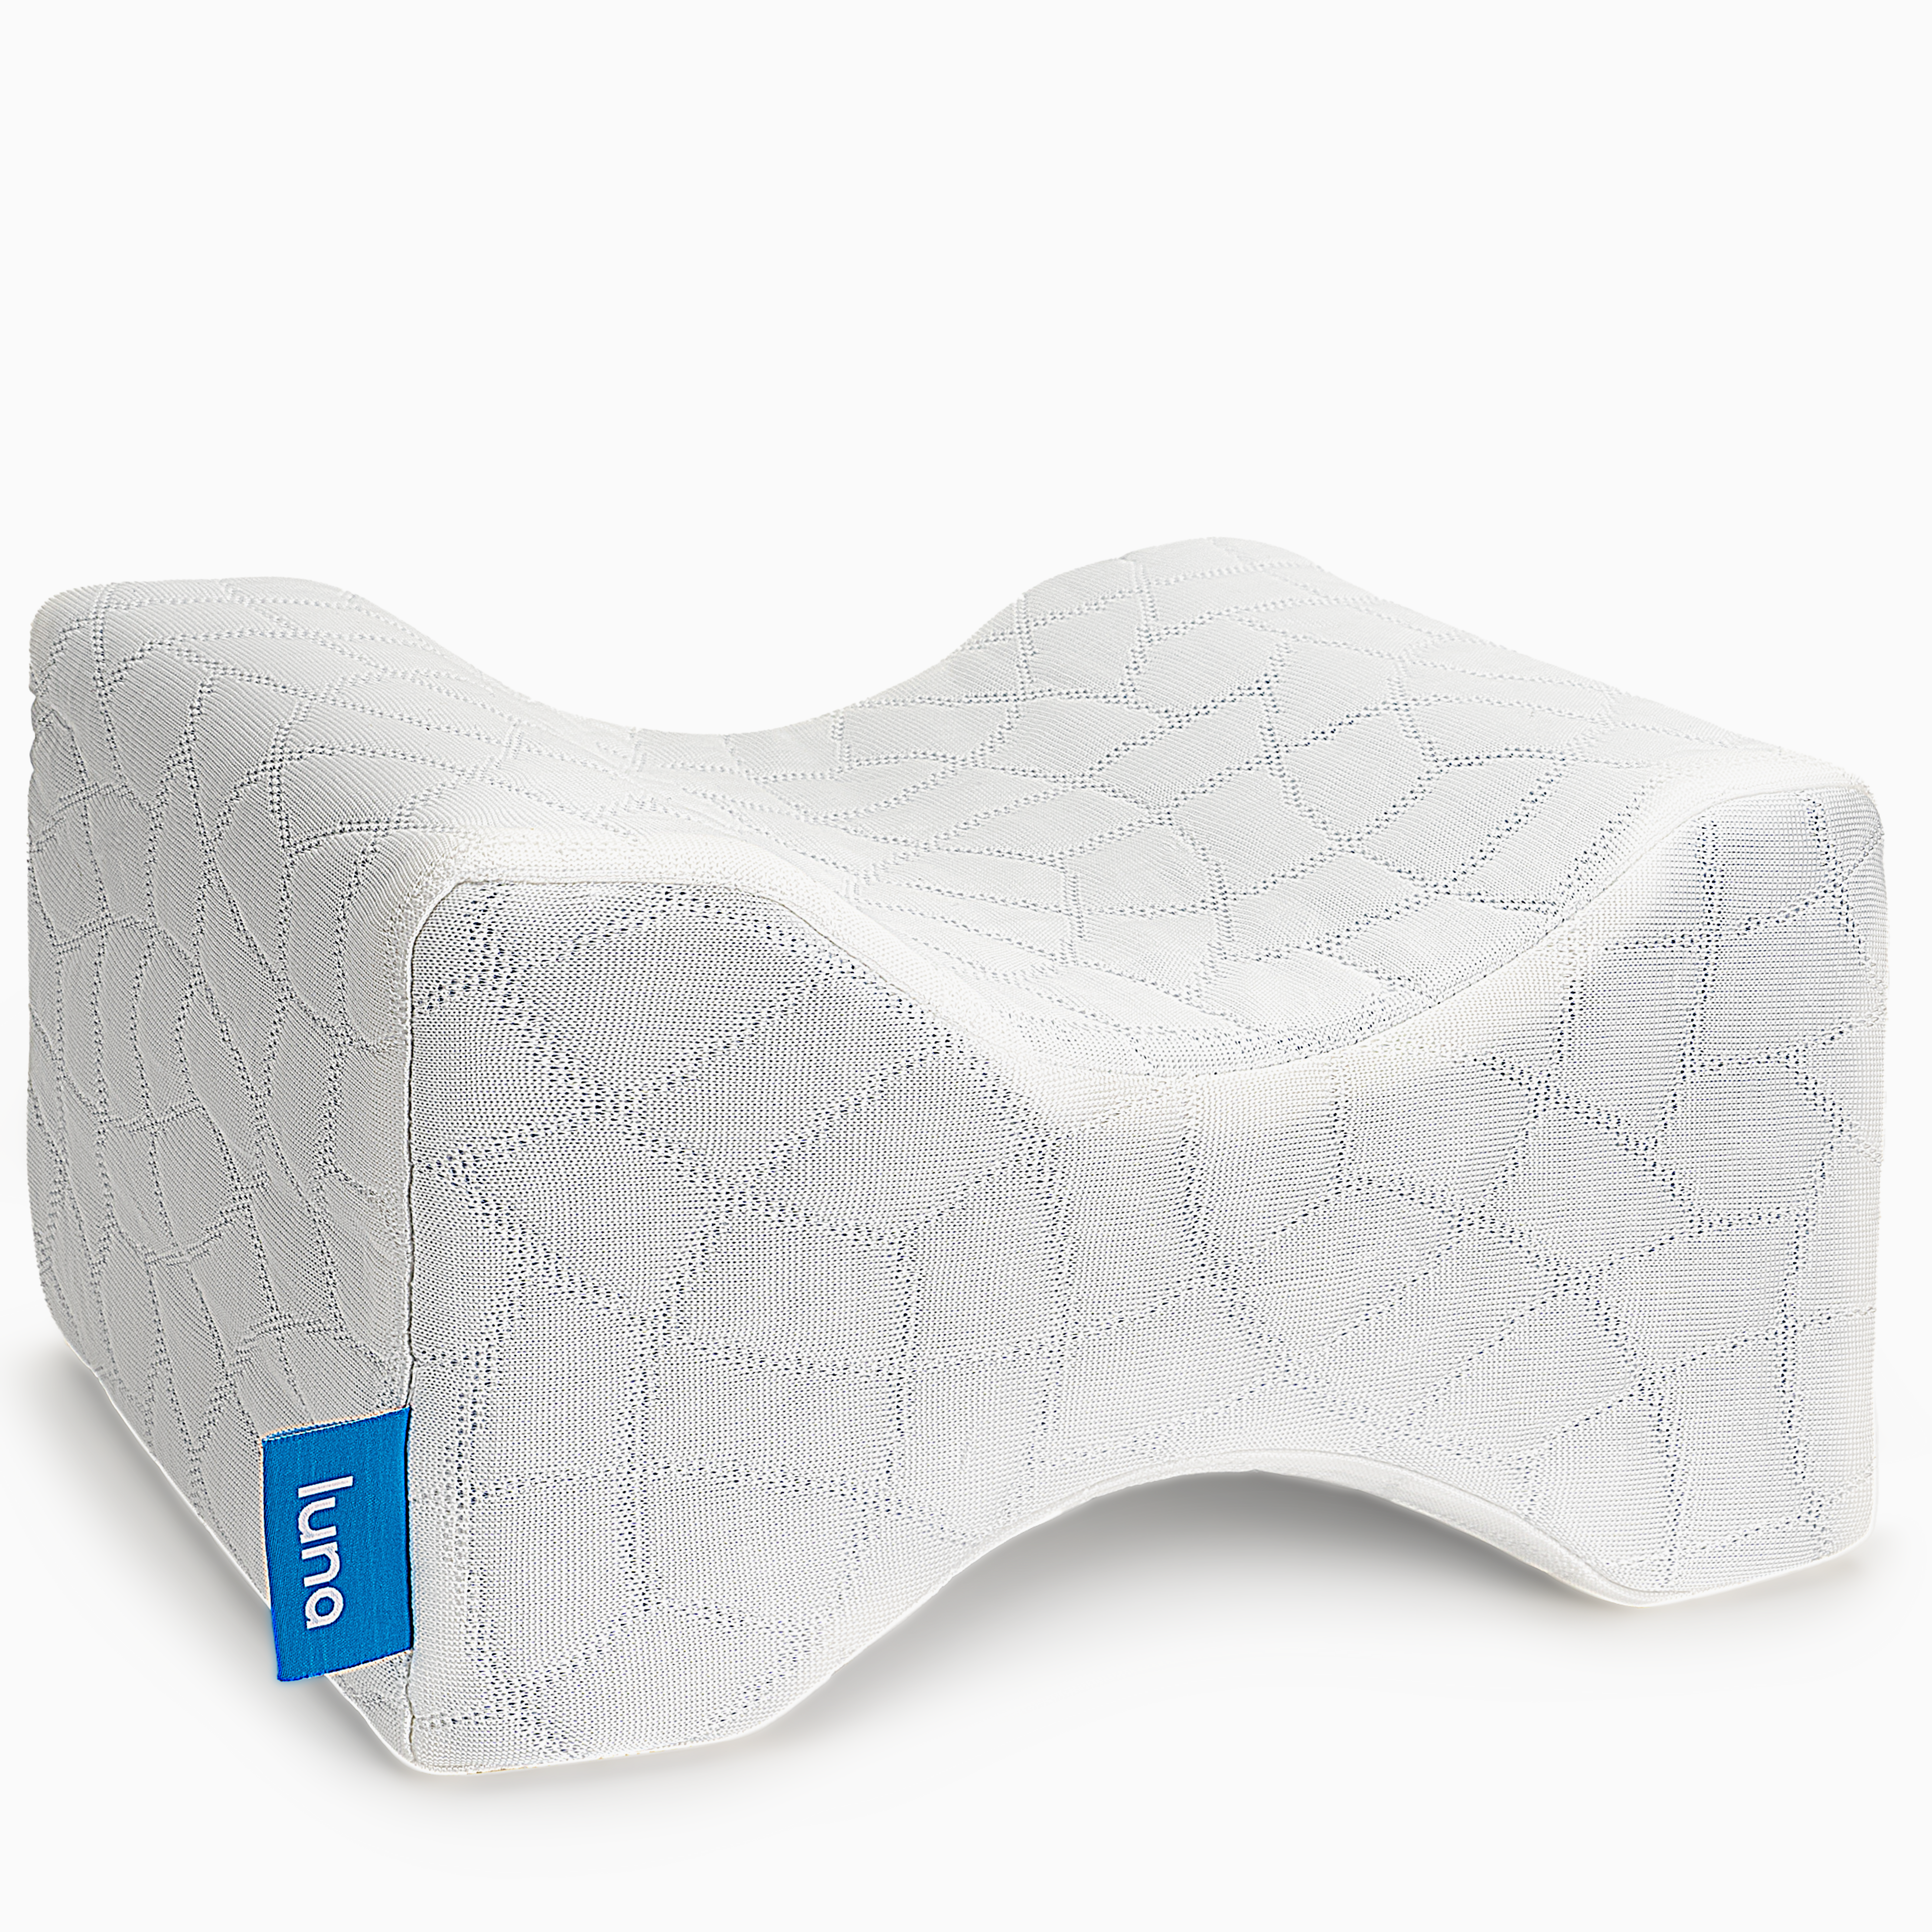 CoolLuxe Orthopedic Knee Pillow